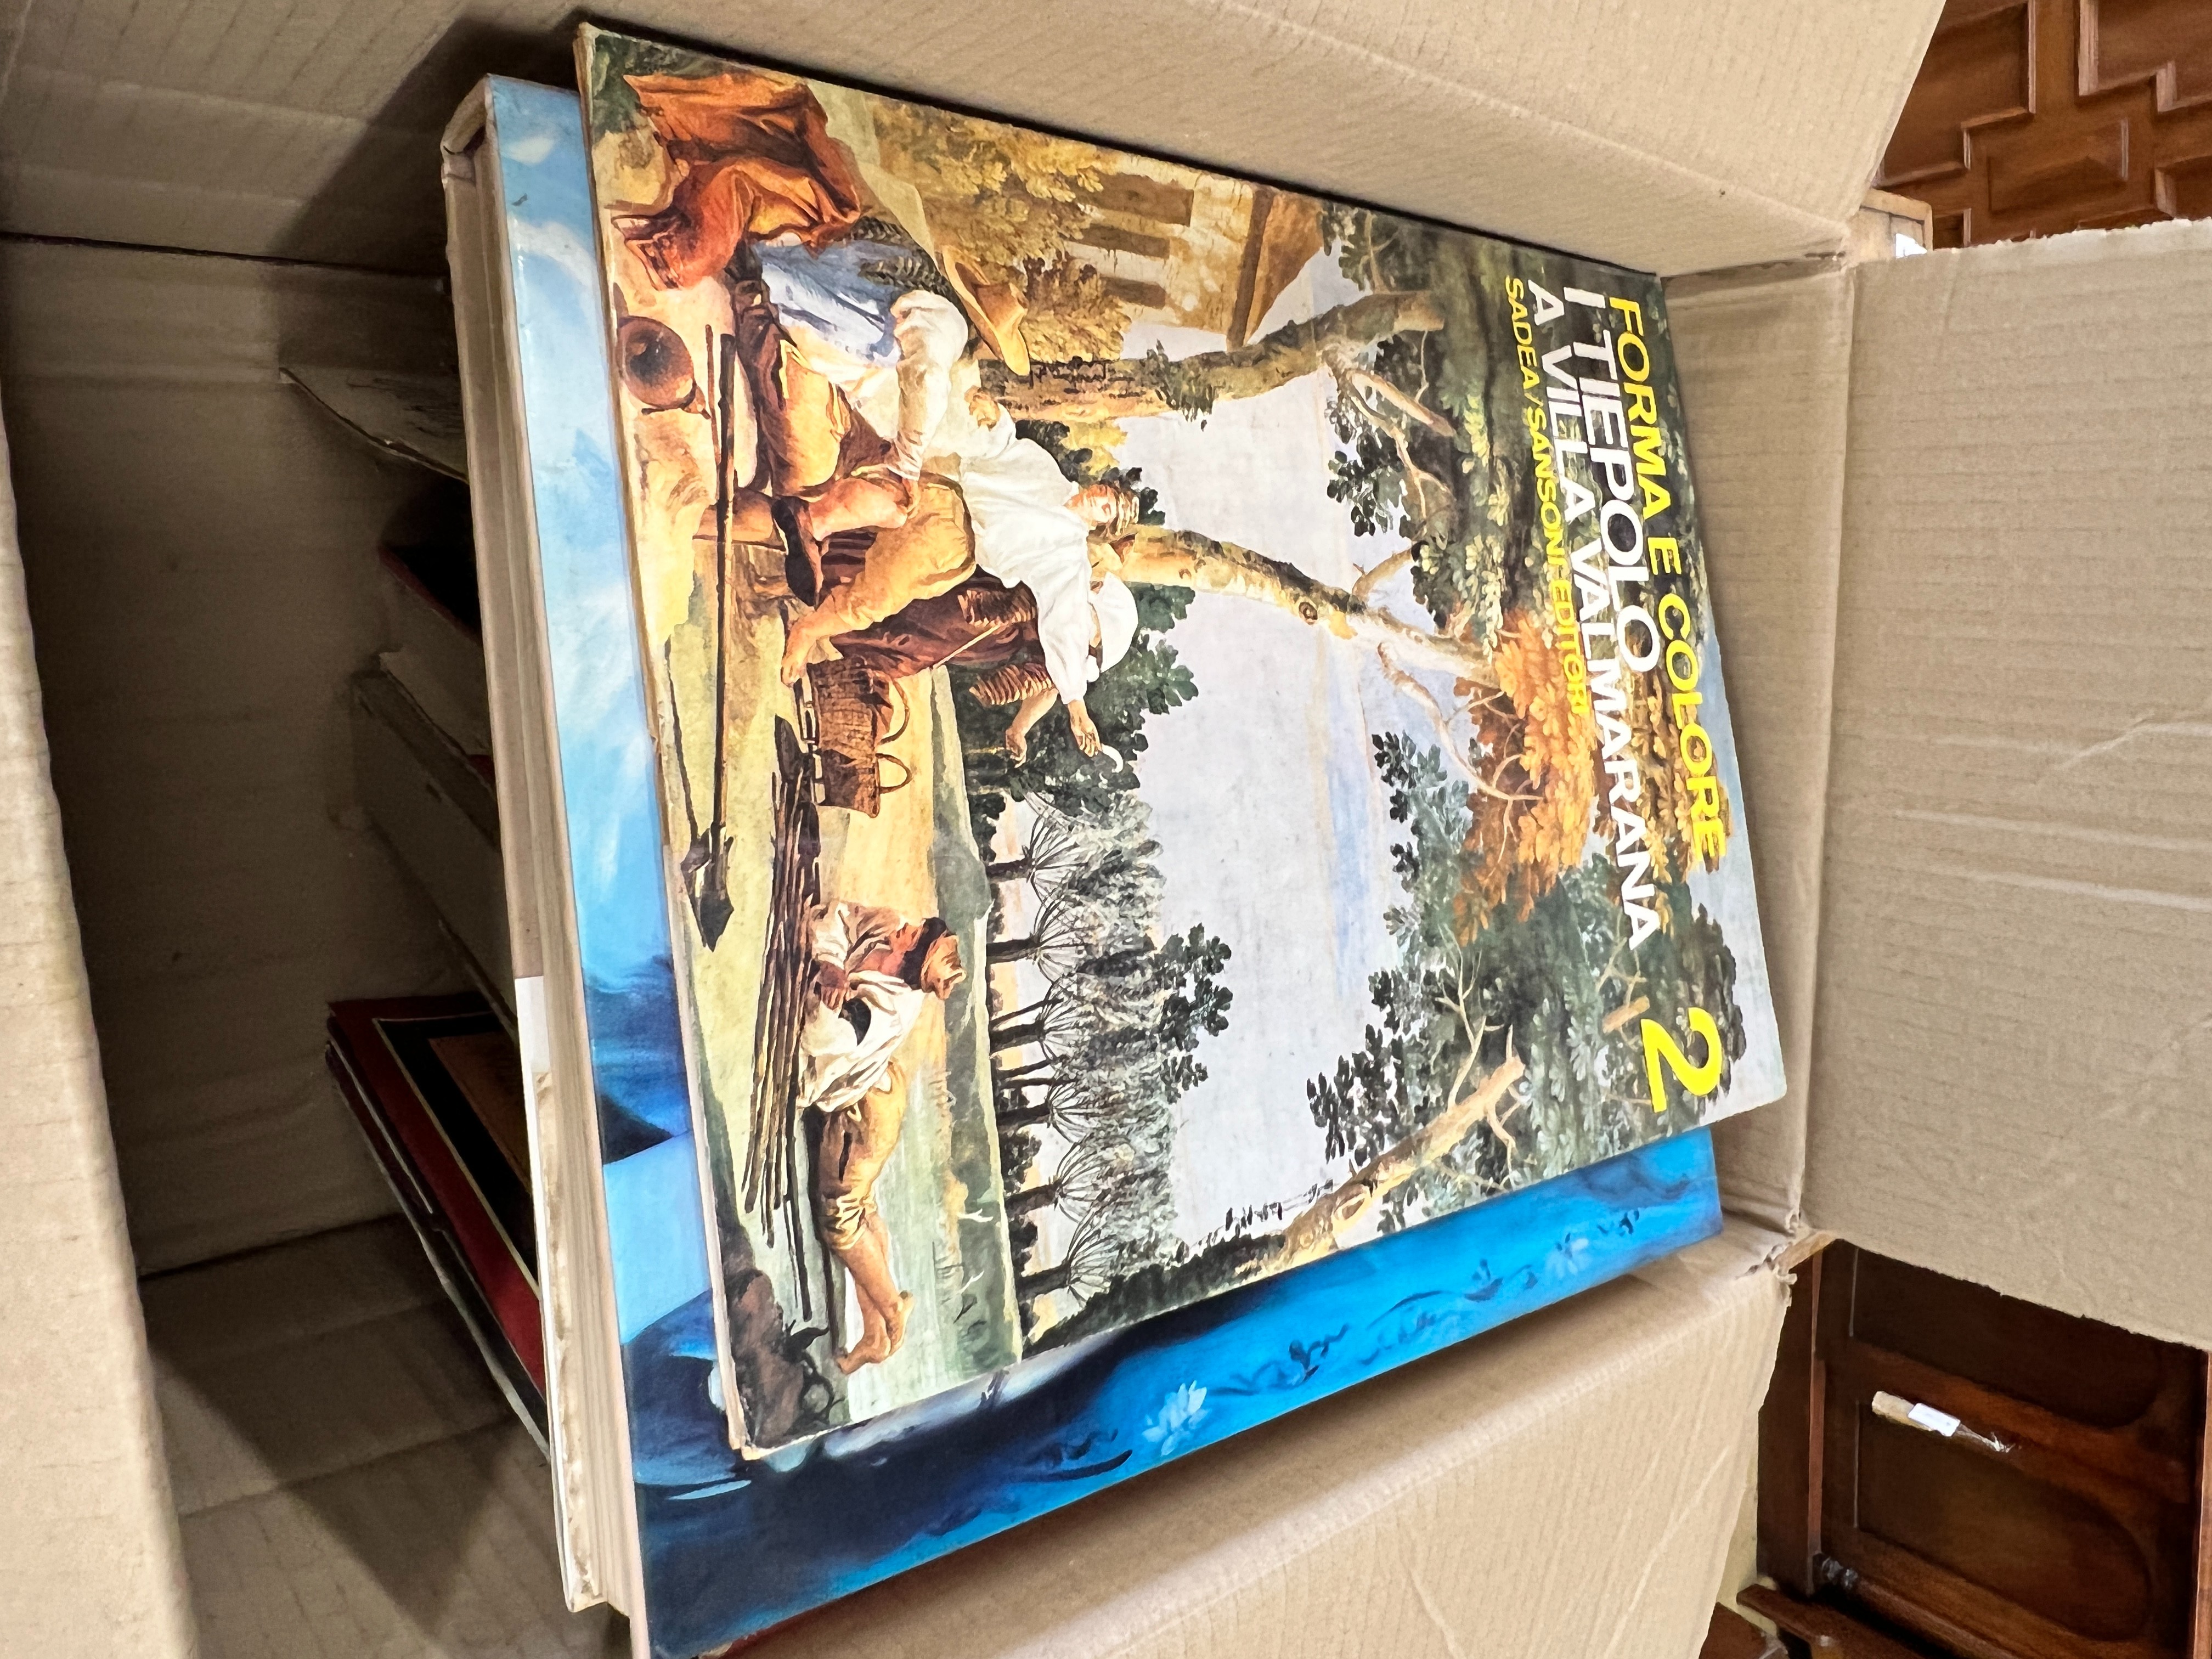 Five boxes of assorted fine art reference books